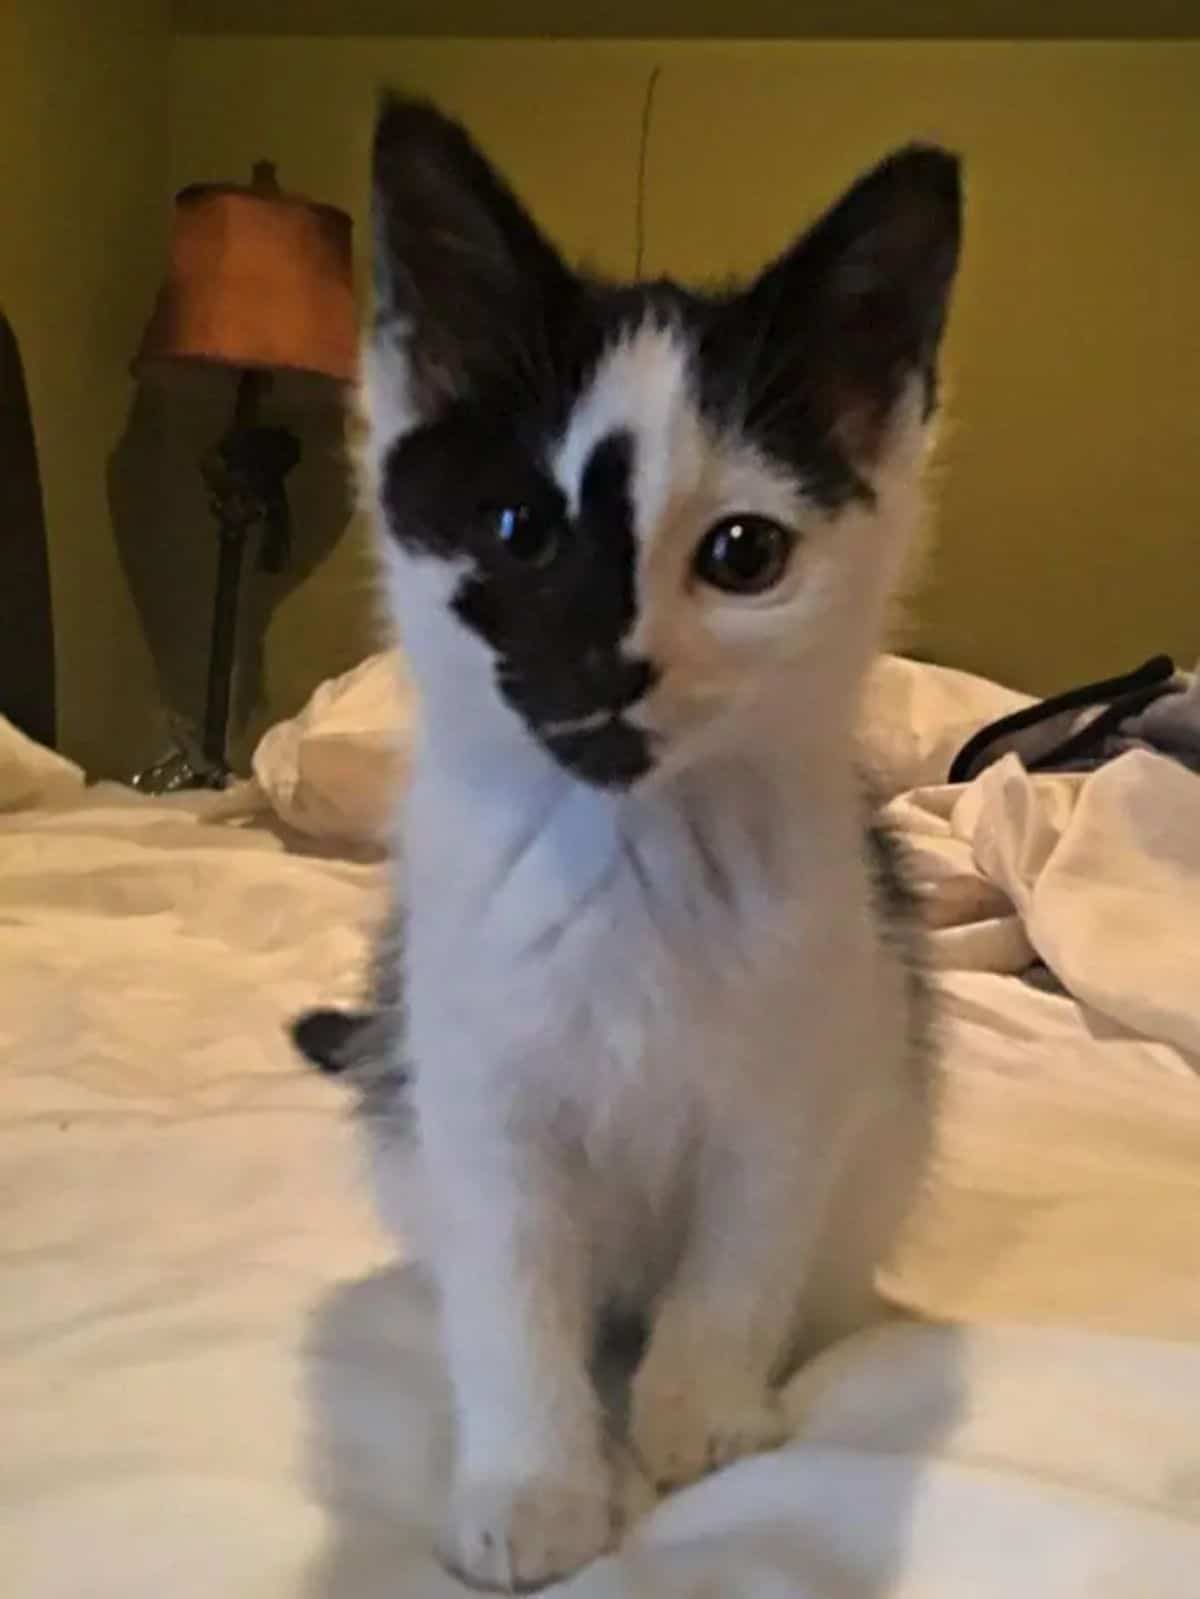 black and white kitten with black eras and black markings on the right side of the face